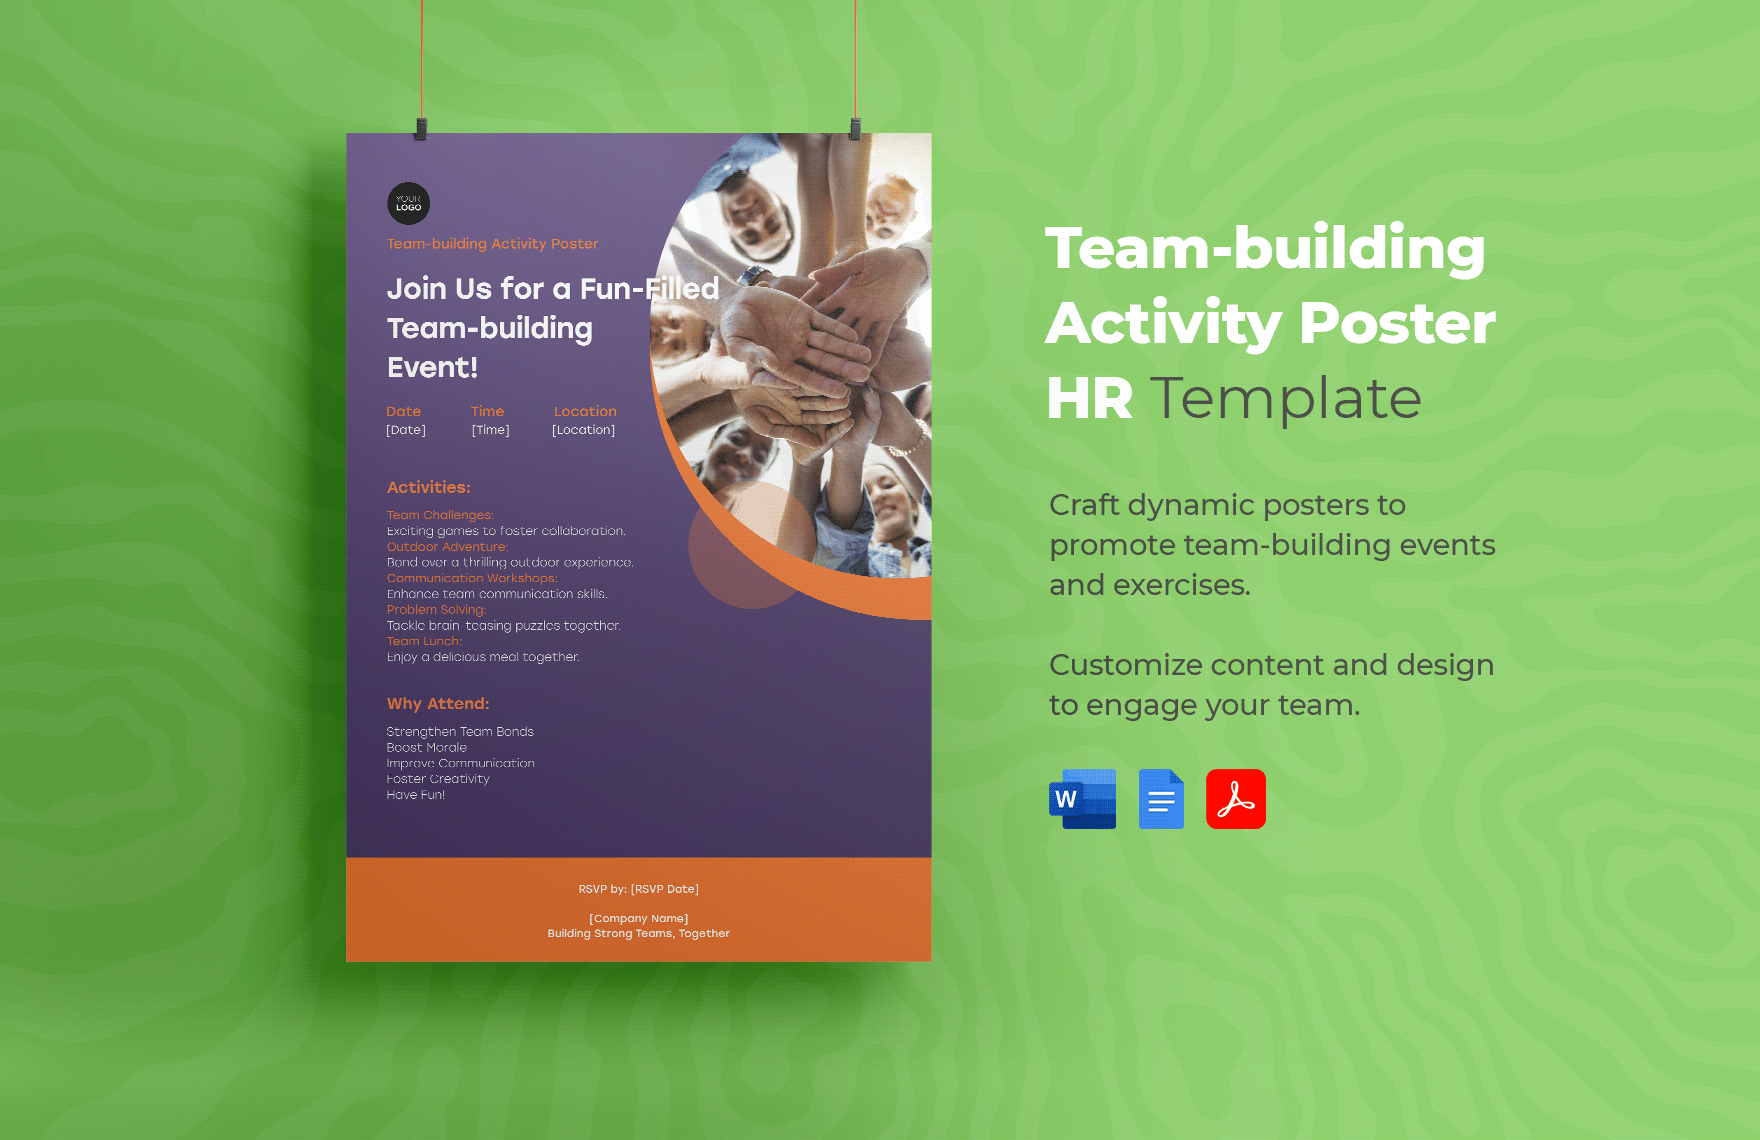 Team-building Activity Poster HR Template